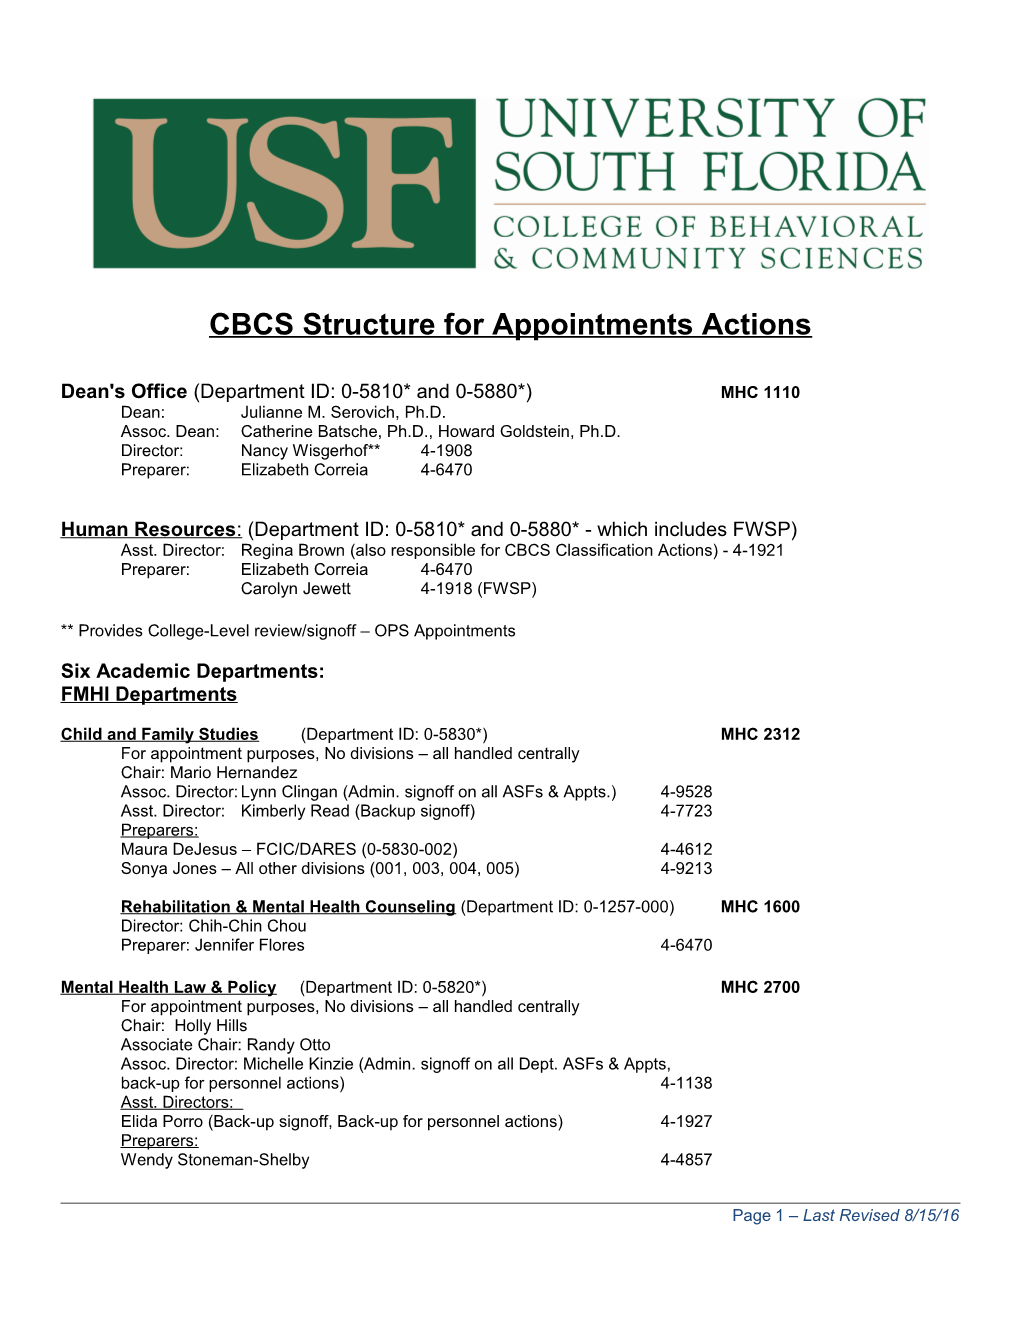 CBCS Structure for Appointments Actions